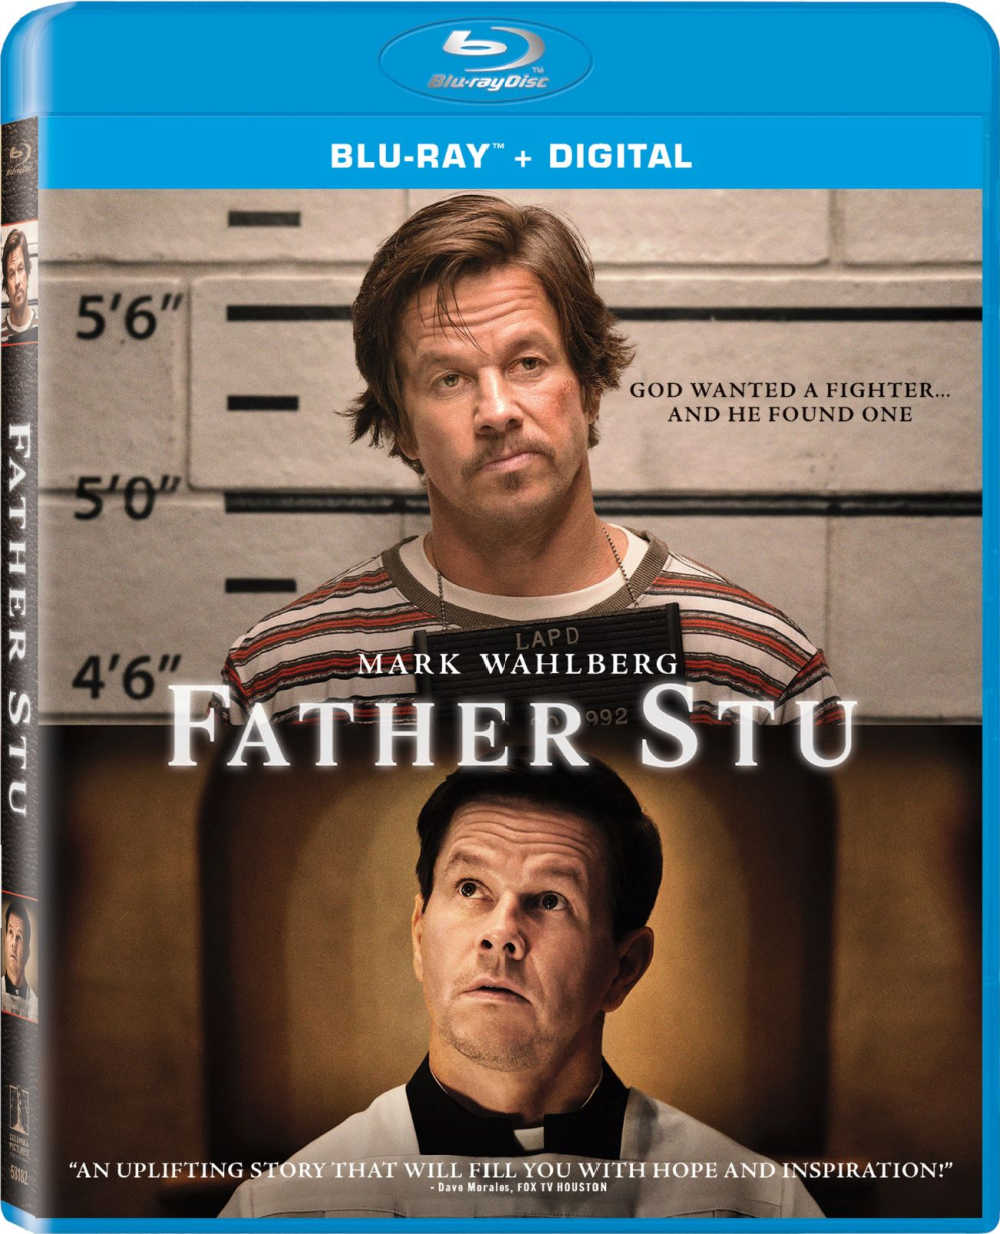 Join Mark Wahlberg as he brings us a true life story about a controversial man who made a sharp turn towards helping others. 